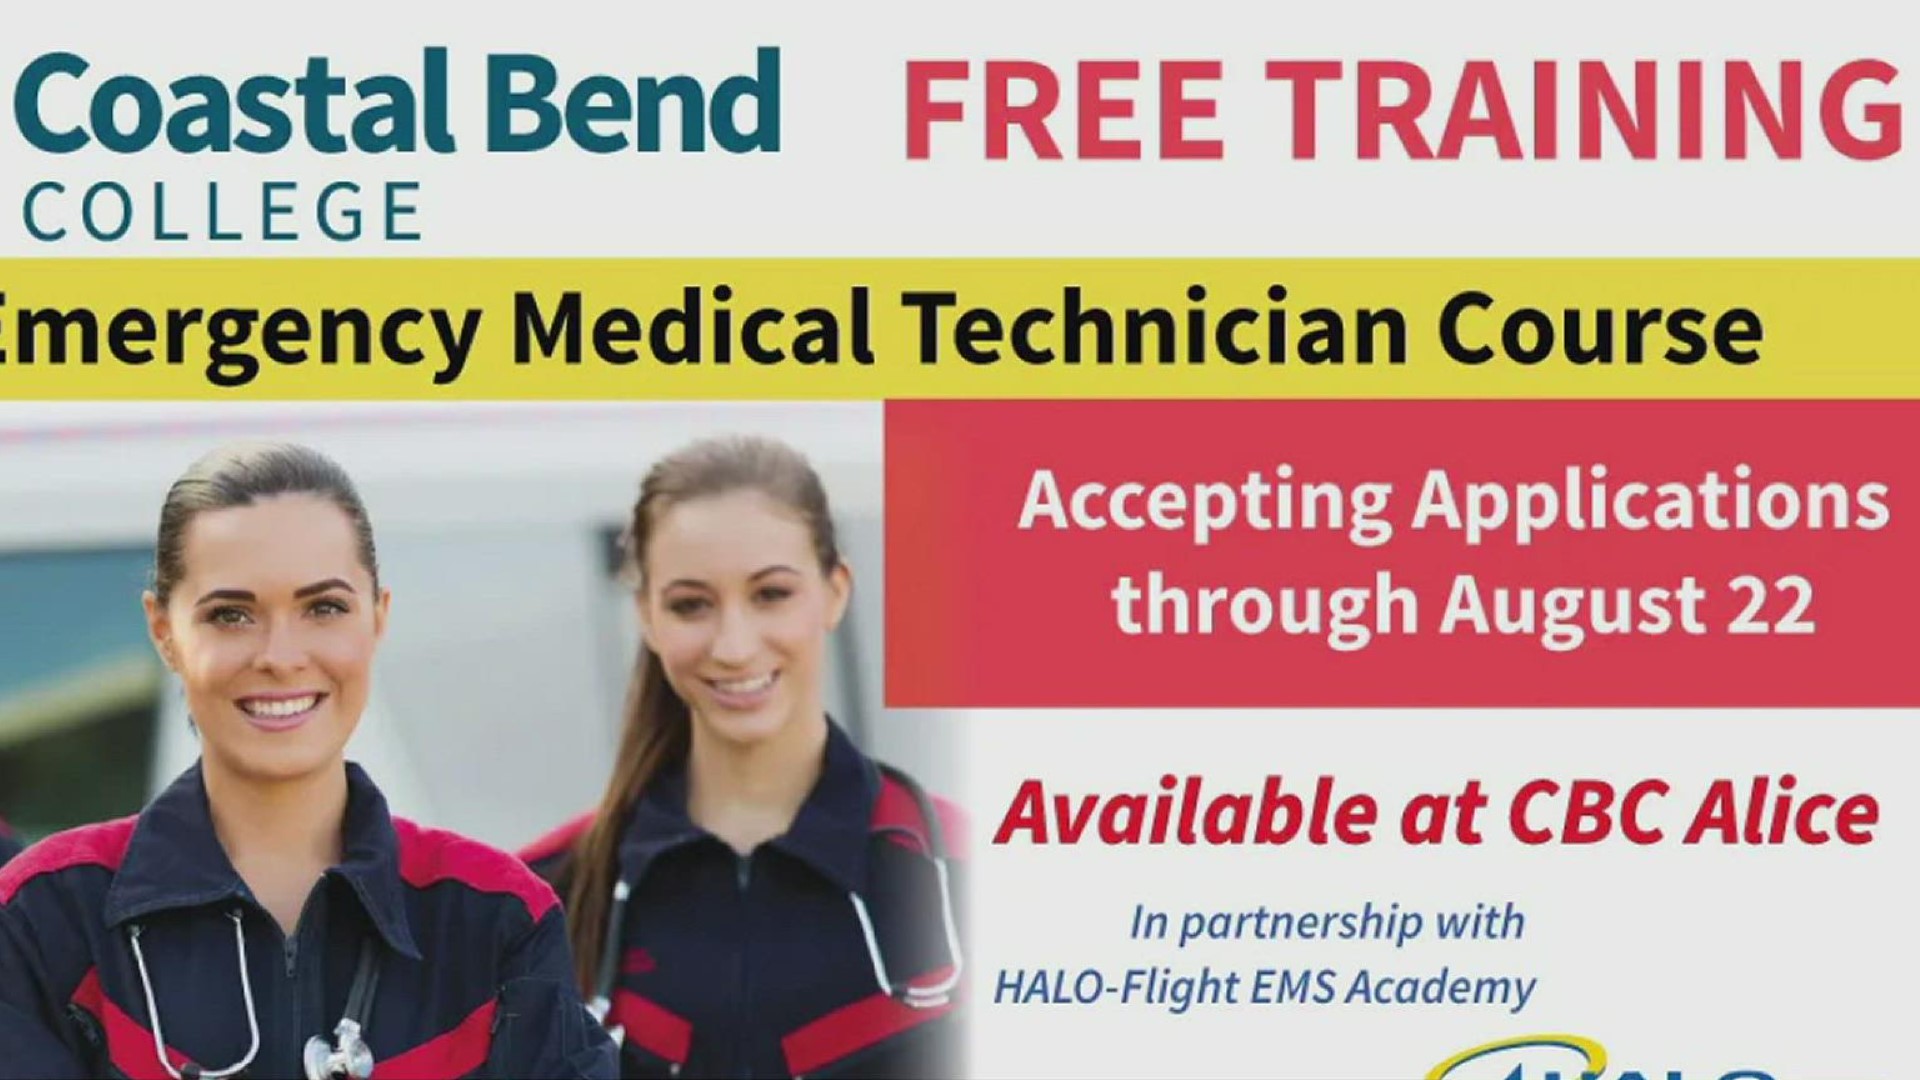 For the last decade, Coastal Bend College in Alice has partnered with the HALO-Flight EMS Academy to help students begin careers as First Responders.